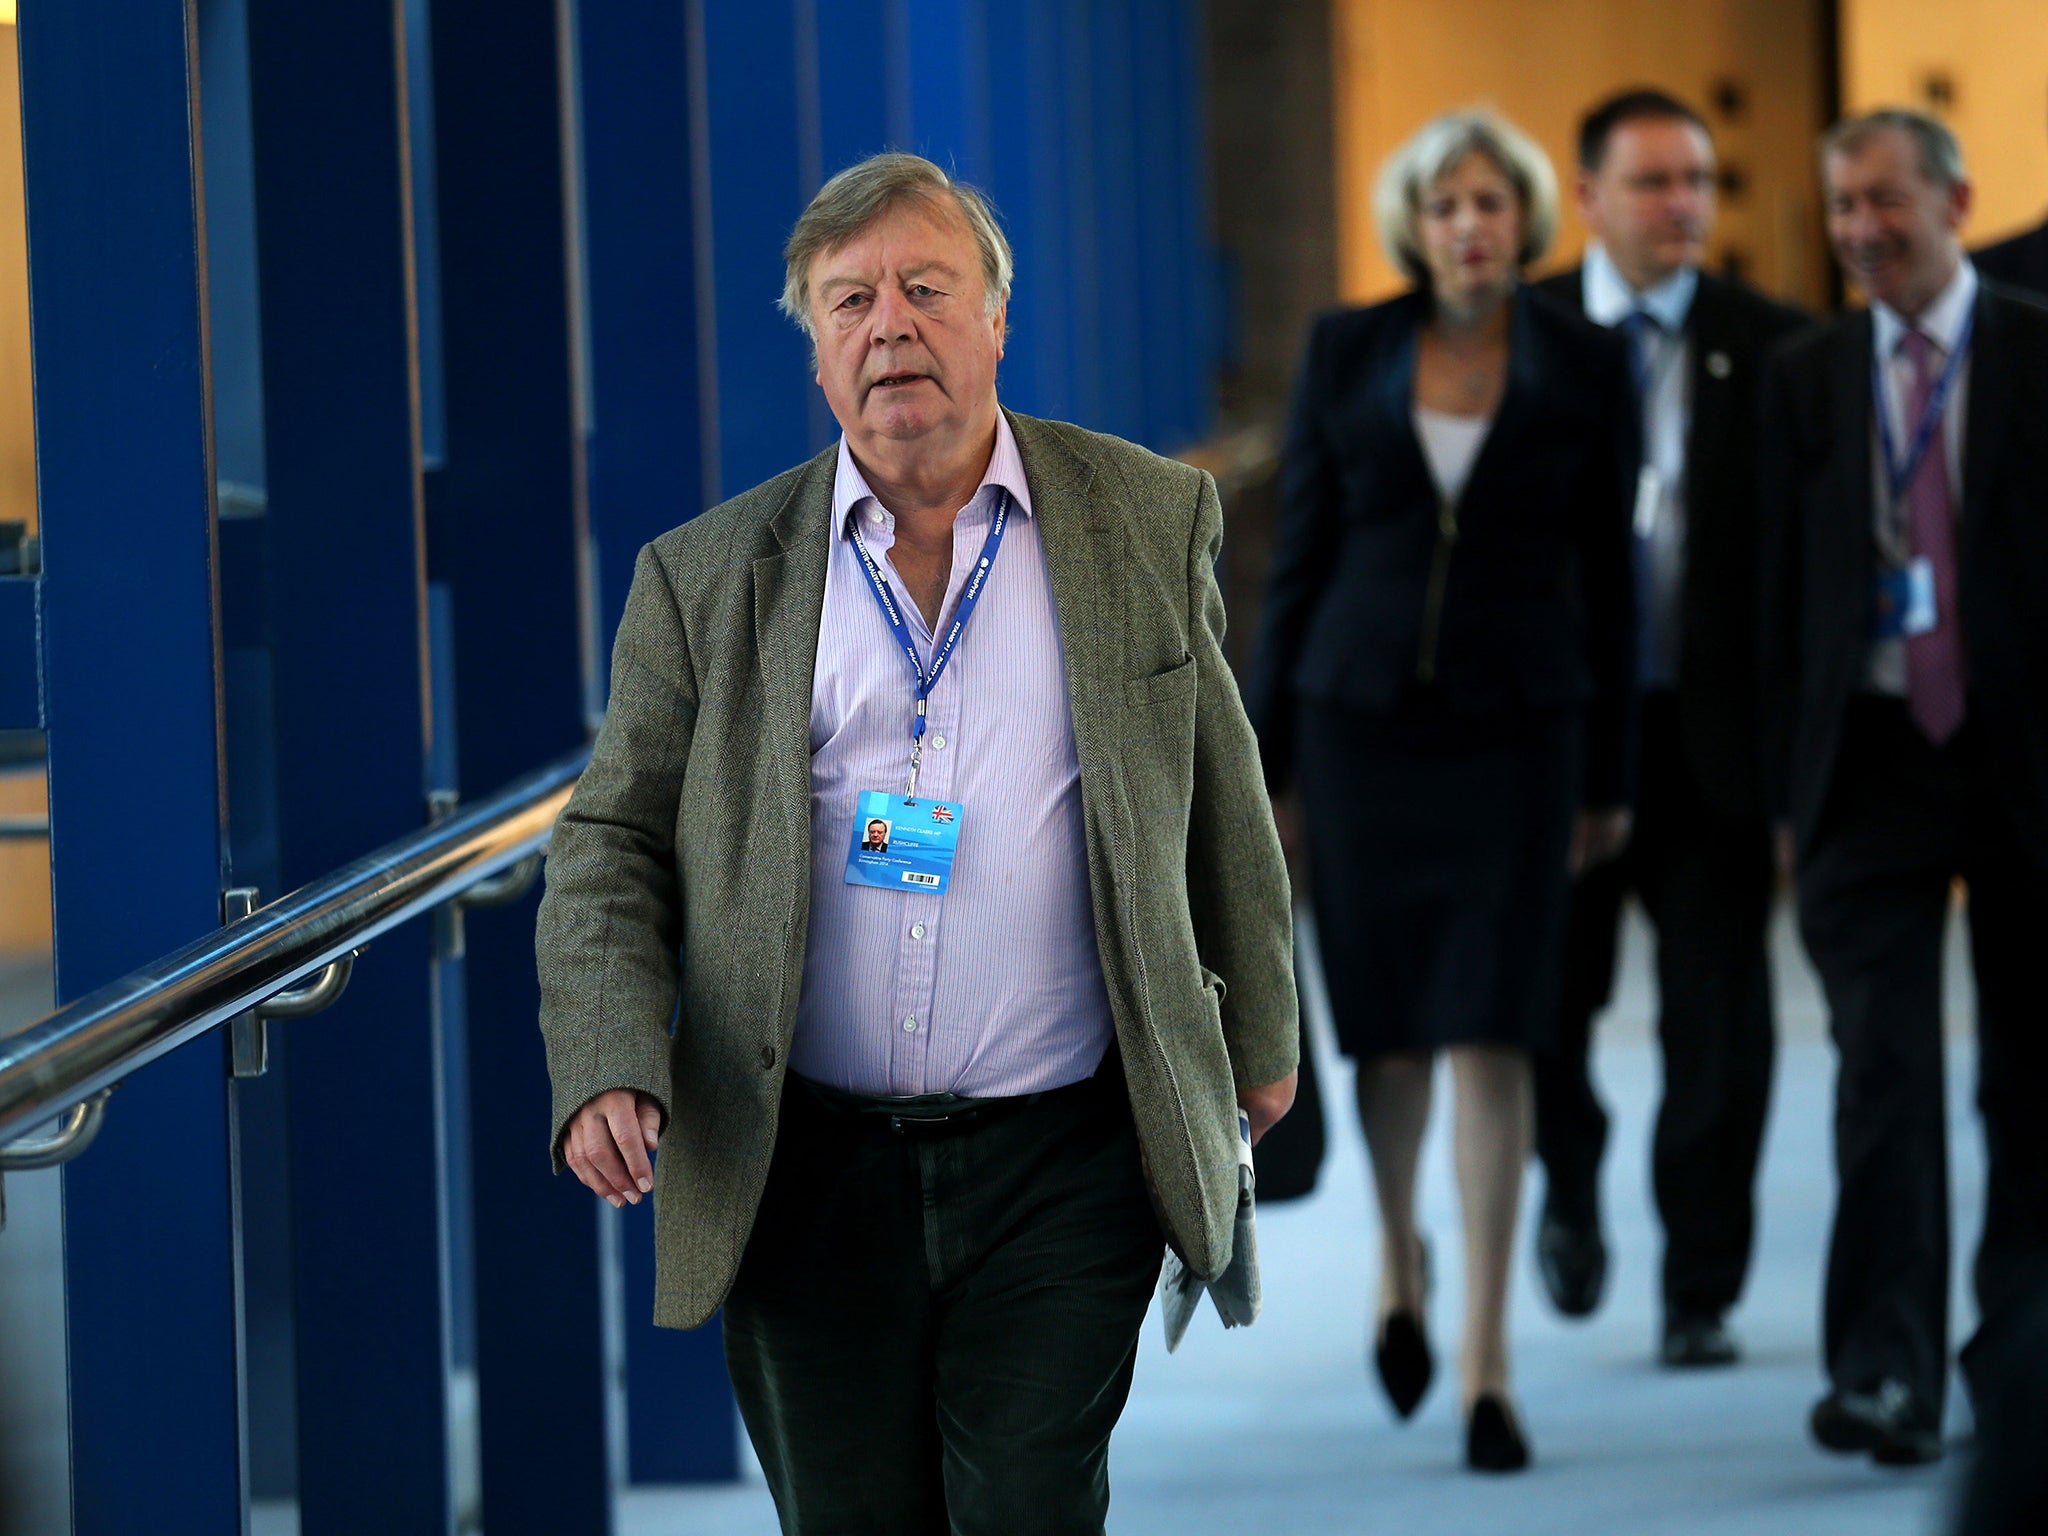 Former cabinet minister Ken Clarke walks to the Conservative party conference ahead of Home Secretary Theresa May in Birmingham